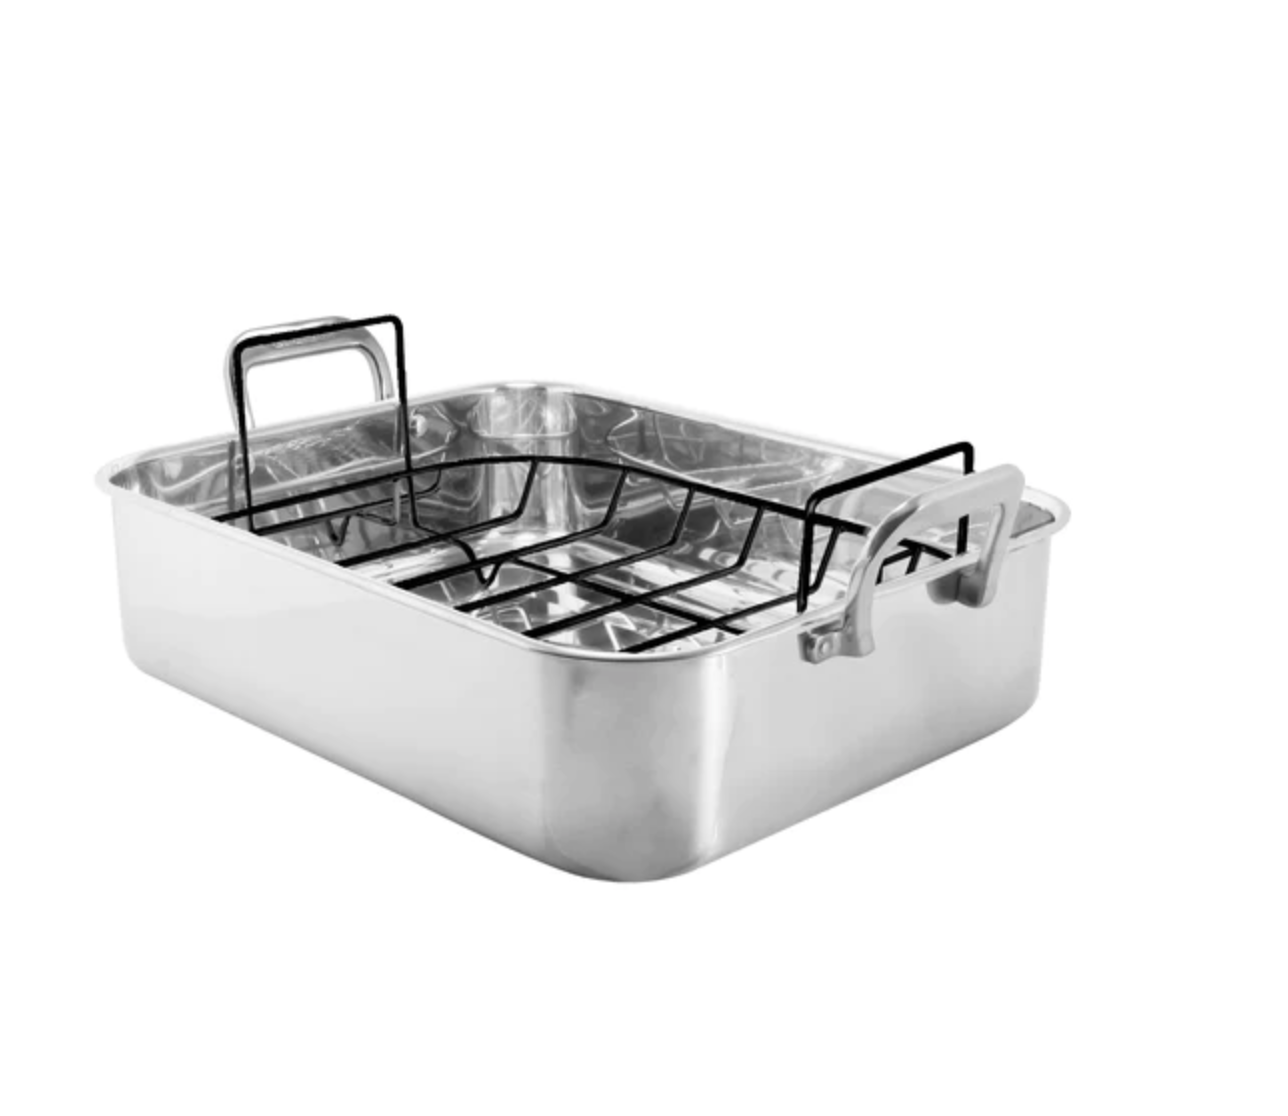 Stainless Steel Roaster with Nonstick Rack